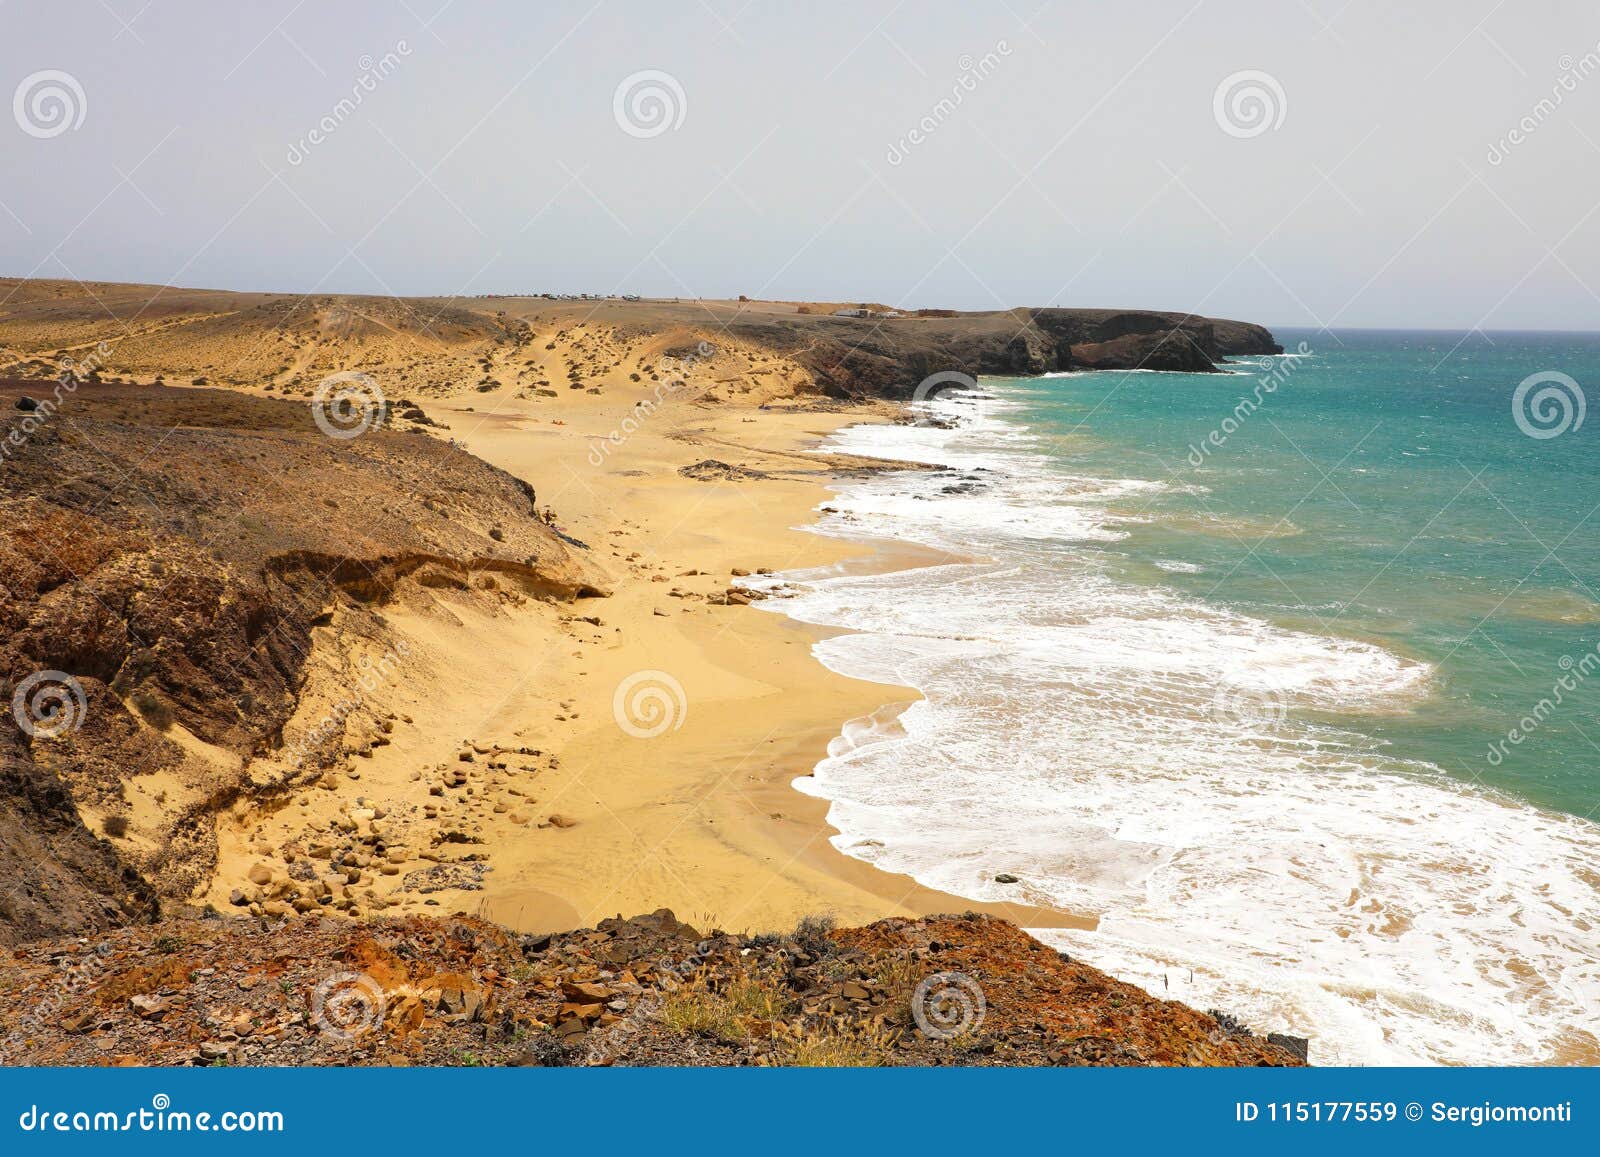 amazing view of lanzarote beaches and sand dunes in playas de papagayo, costa del rubicon, canary islands